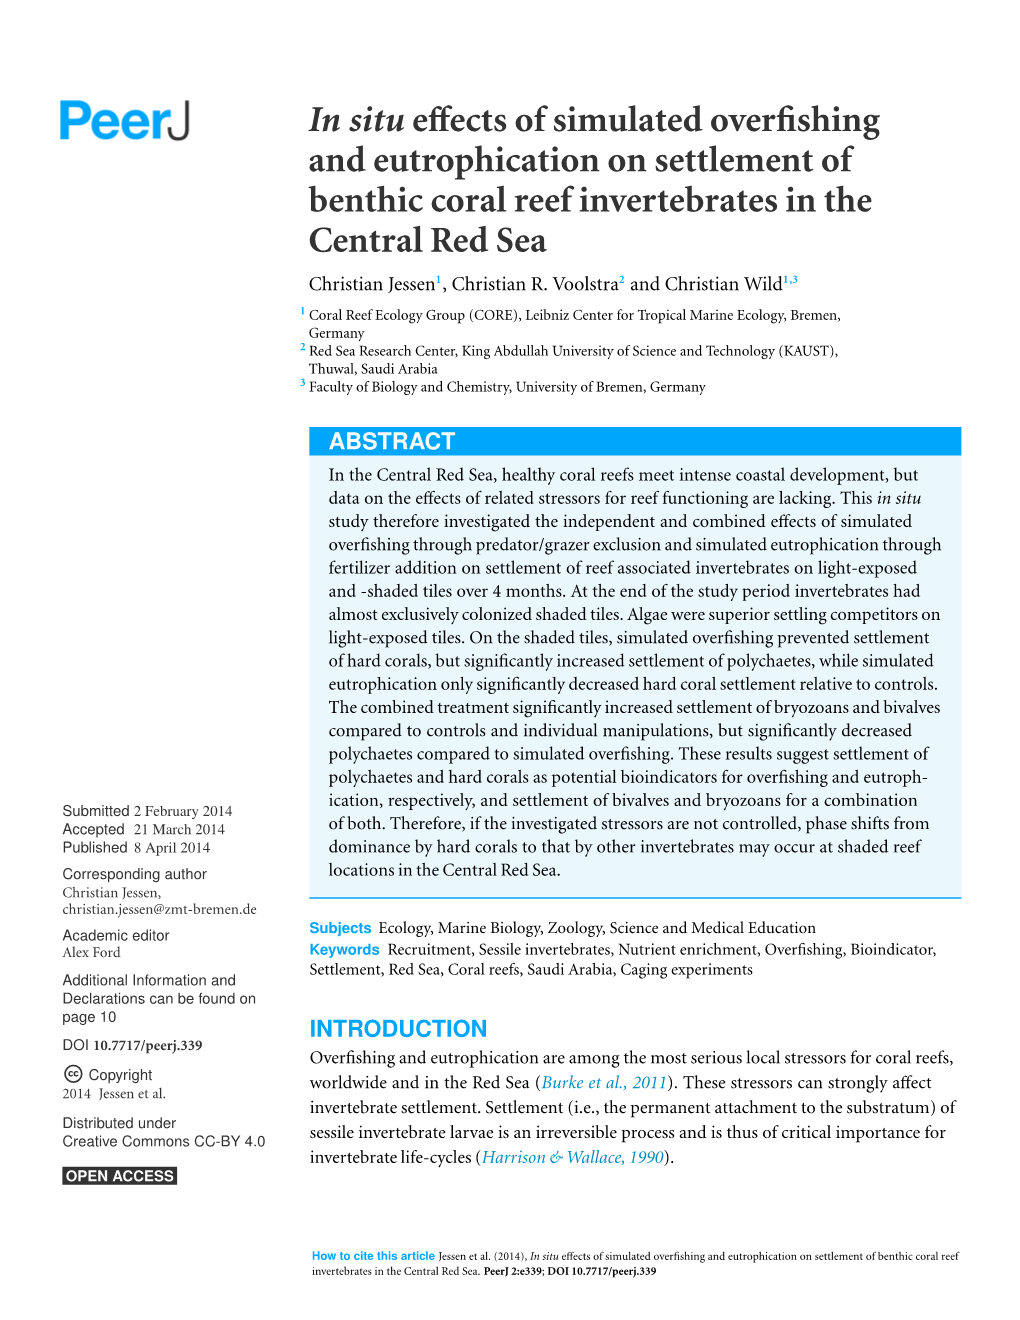 In Situ Effects of Simulated Overfishing and Eutrophication on Settlement of Benthic Coral Reef Invertebrates in the Central Red Sea Christian Jessen1, Christian R